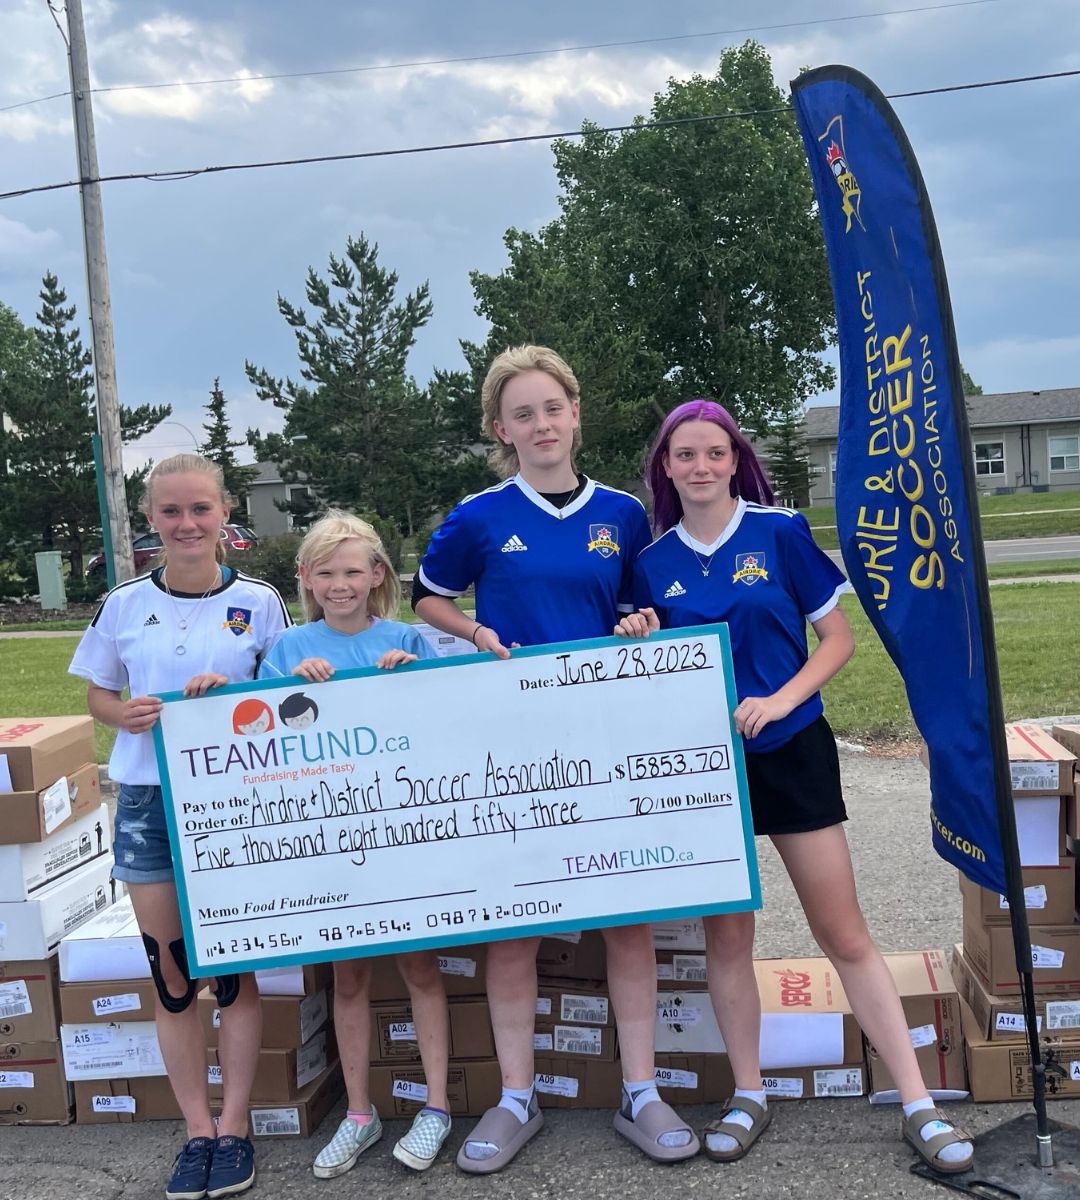 Airdrie & District Soccer Association raised over $5800 in their June 2023 Fill Your Freezer fundraiser.